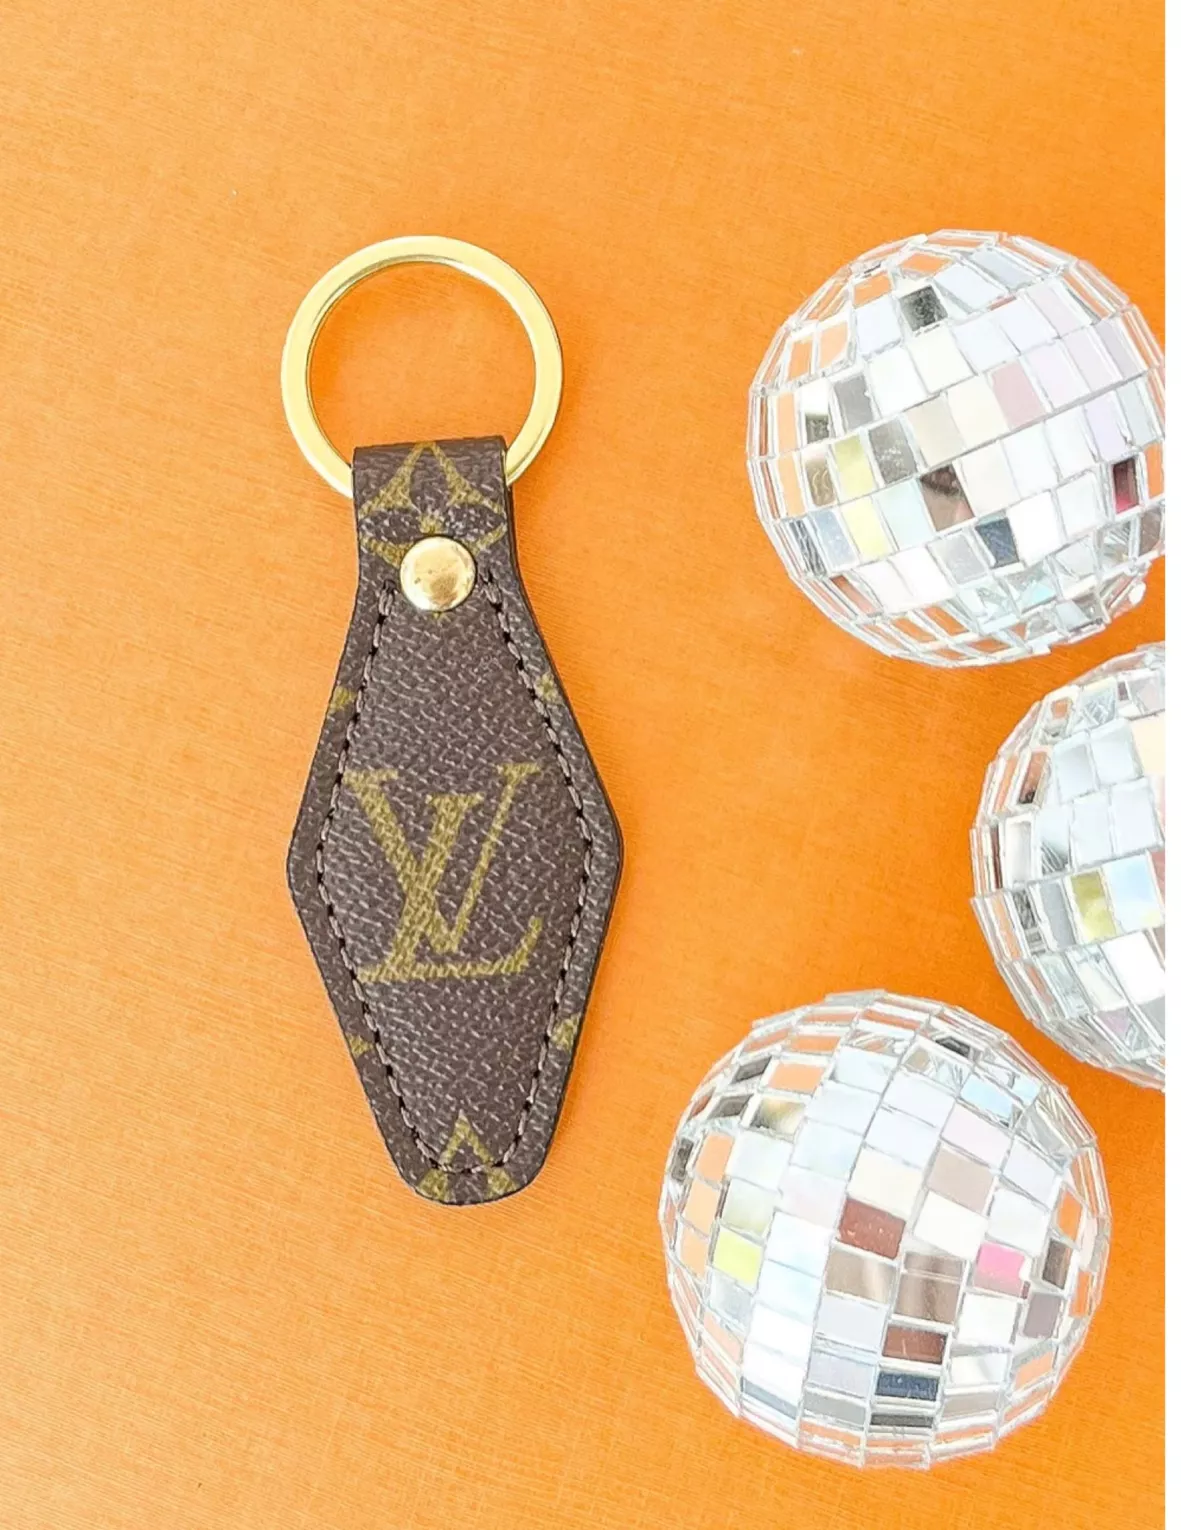 Upcycled Louis Vuitton Mickey Keychain